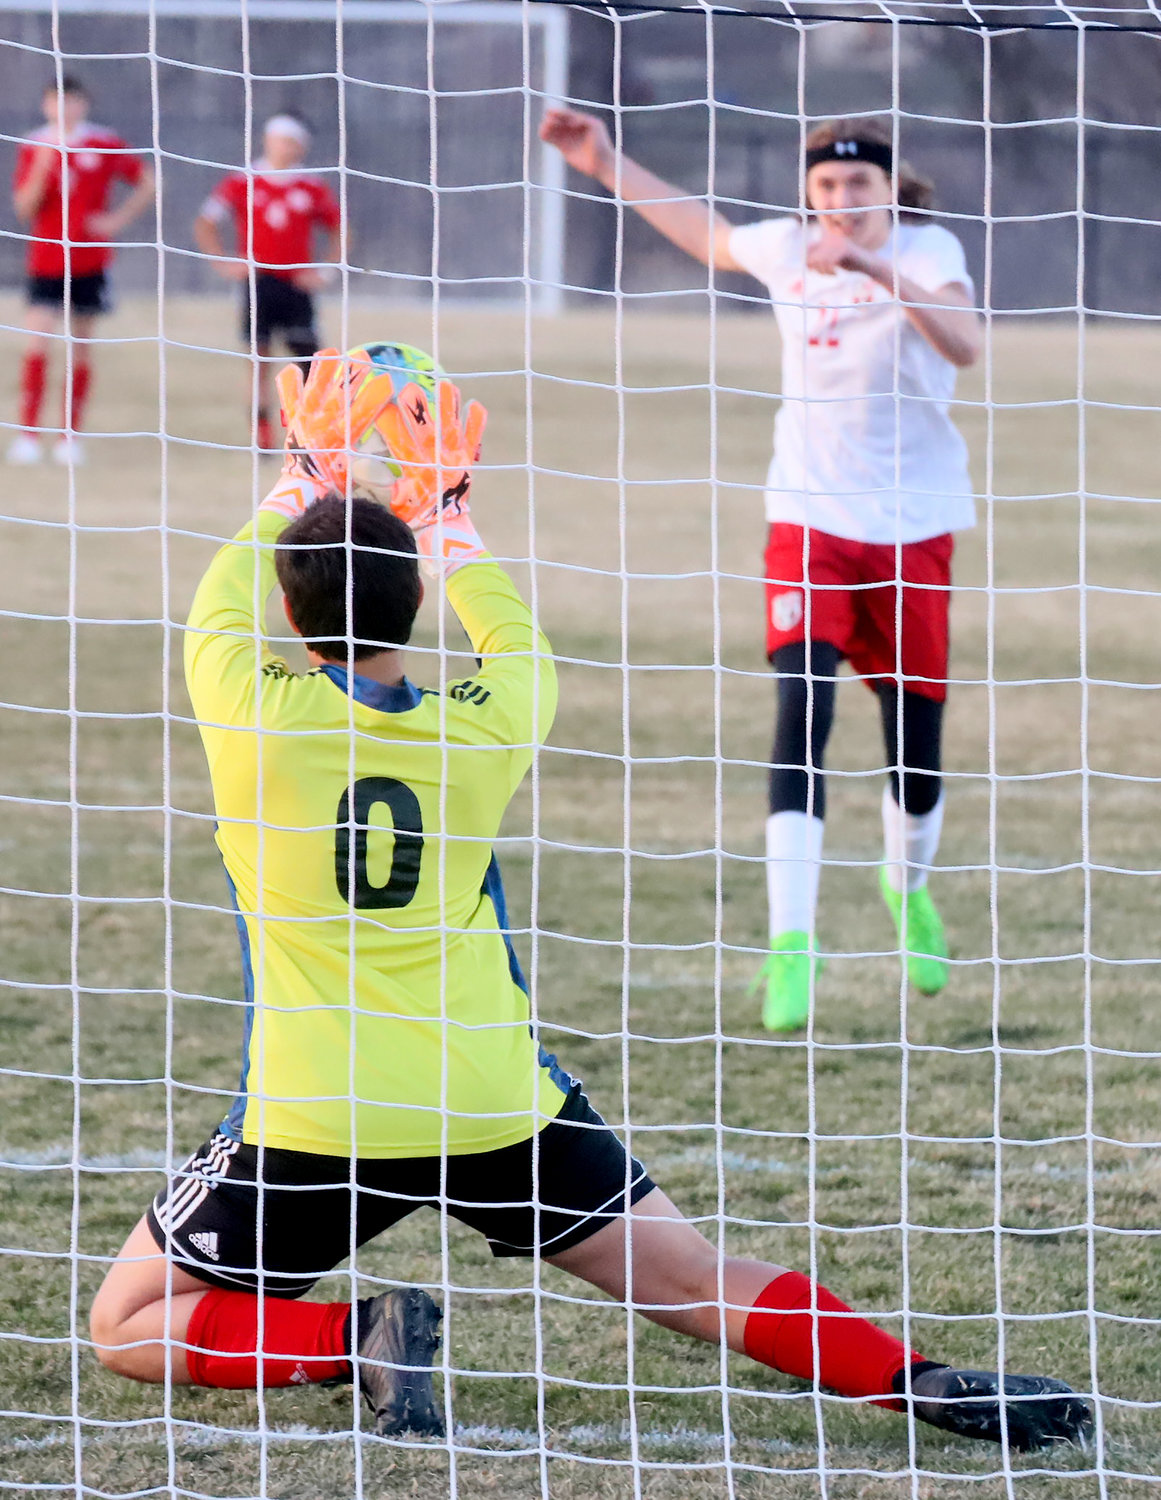 Fort Madison's Oliver Santiago gets a block on a penalty kick in a sudden victory penalty kick session Tuesday night at Baxter Sports Complex.